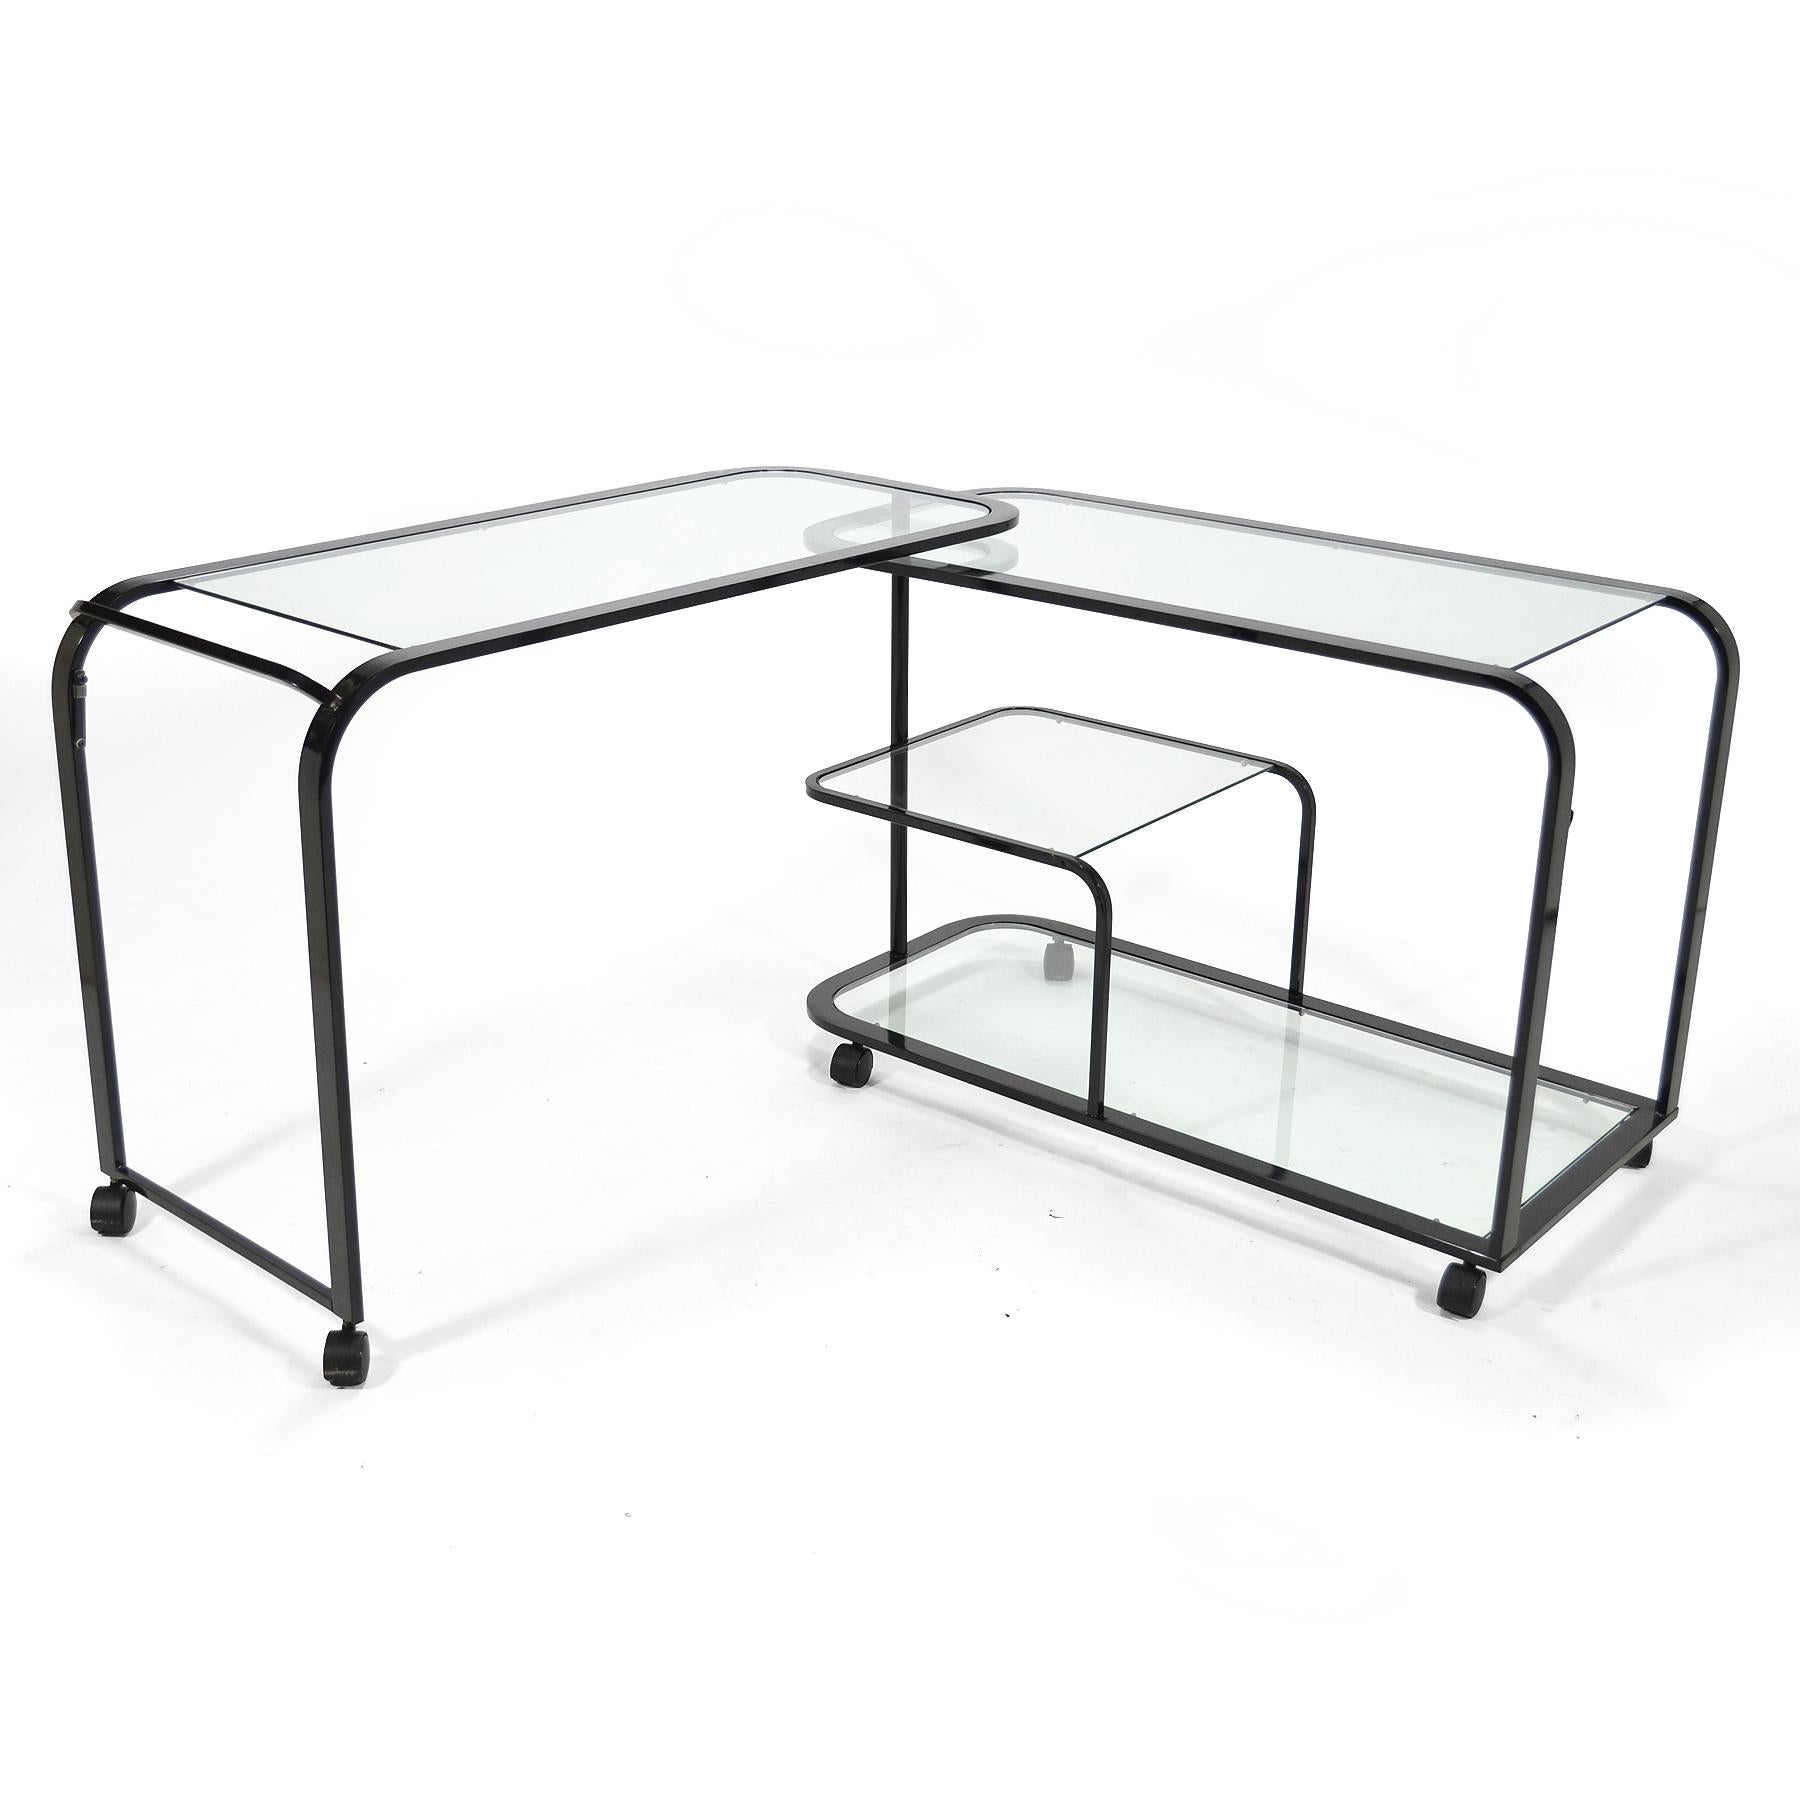 This great bar cart or serving cart by Design Institute of America can unlatch, swing open, and double in size to serve a large party. More commonly seen in brass or chrome, the black finish on the frame of this example lends a stronger graphic